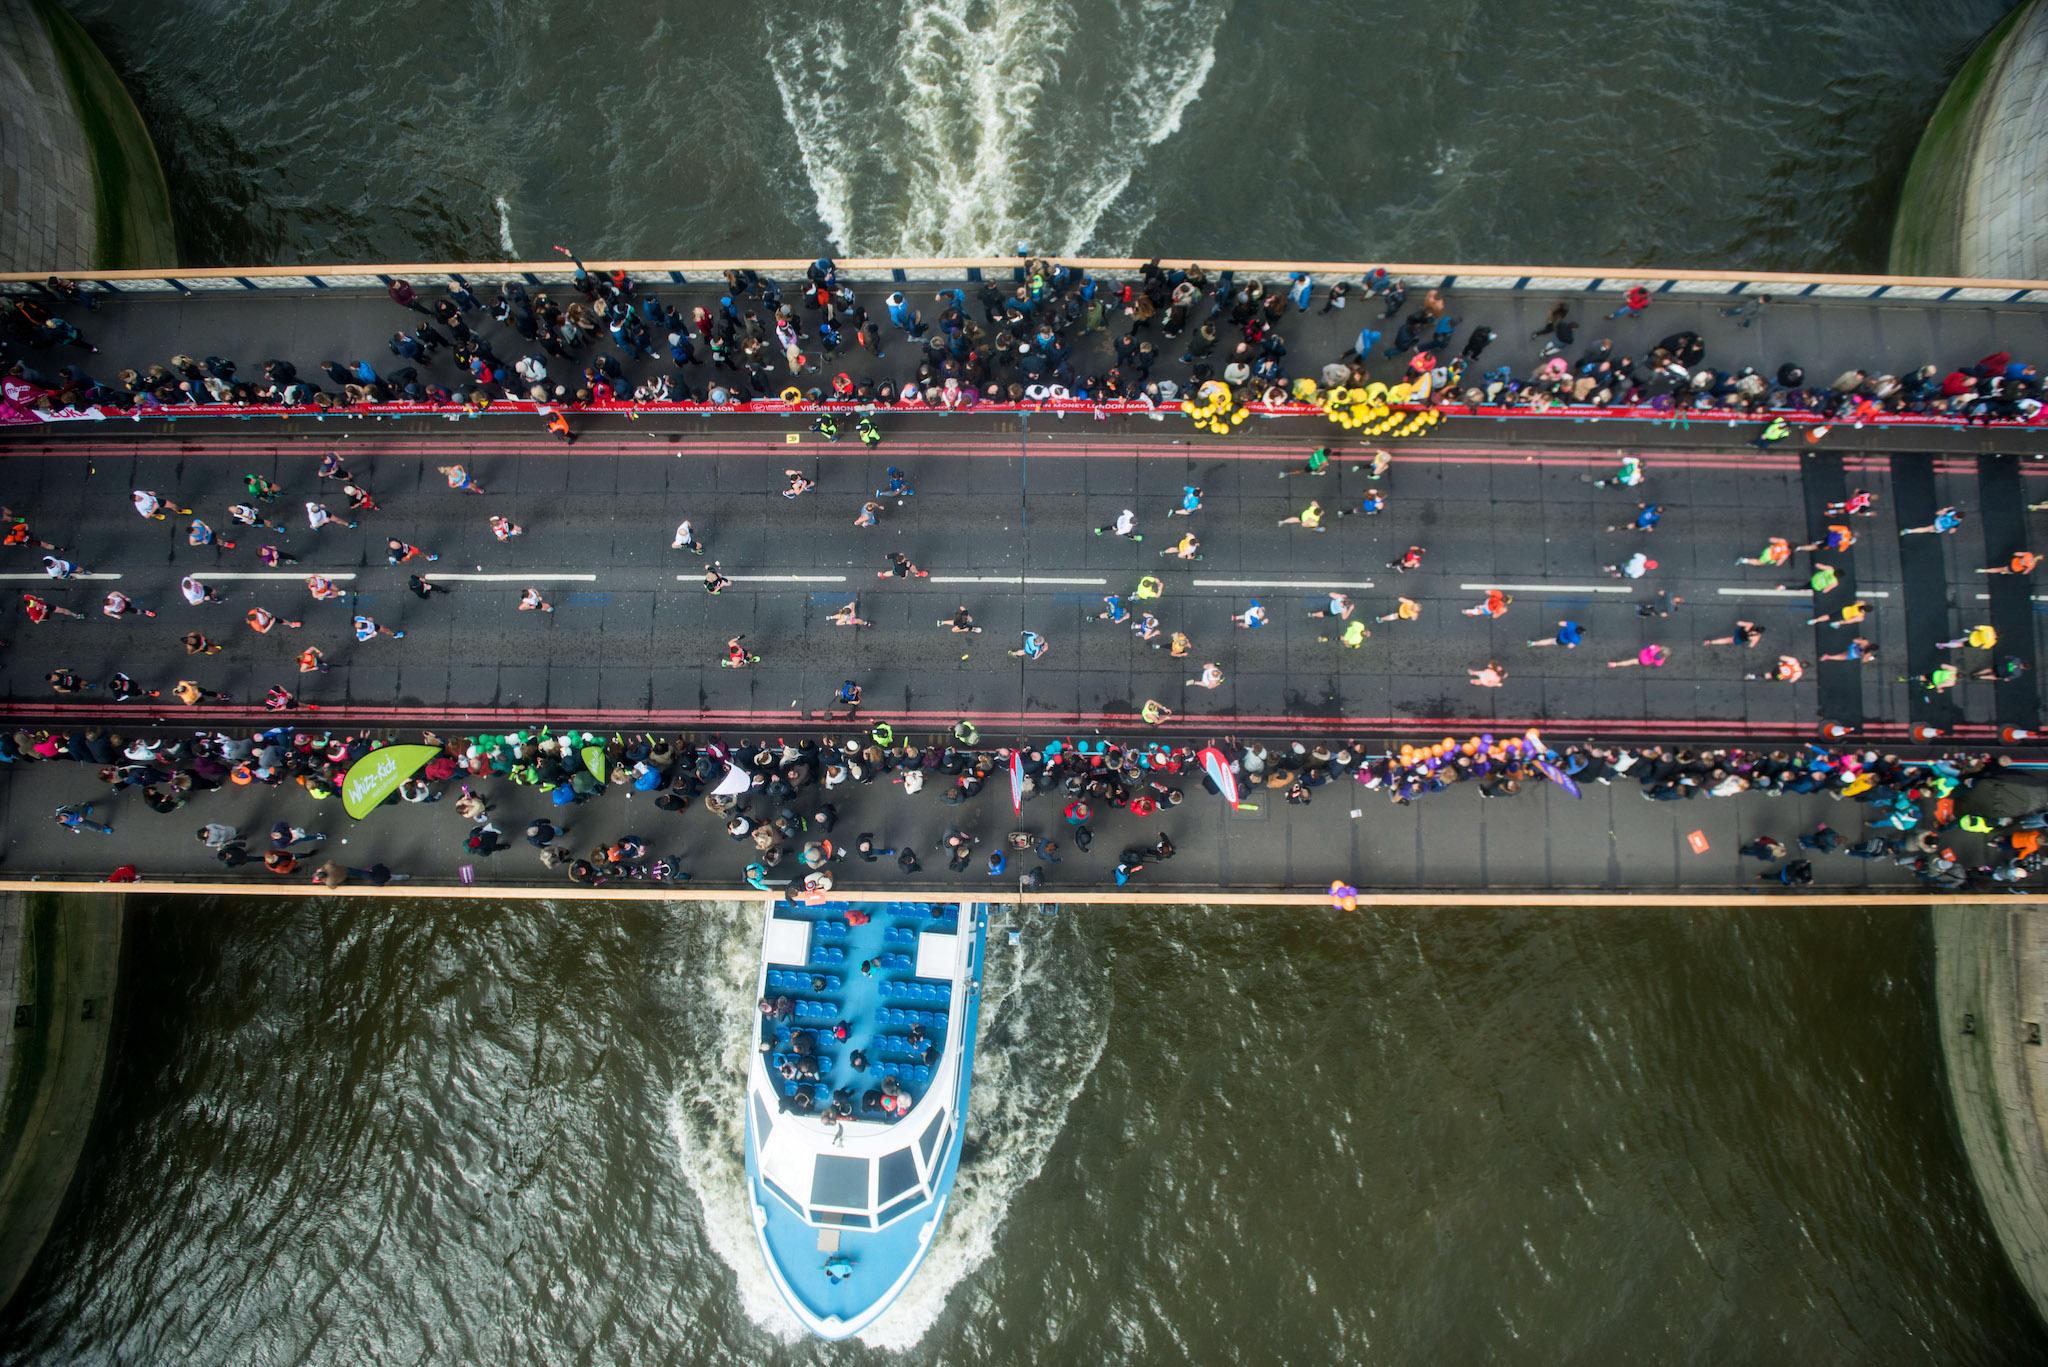 Runners cross over Tower Bridge as seen from the glass floor of Tower Bridge walkway, during the 36th London Marathon at United Kingdom on April 24, 2016 in London, England